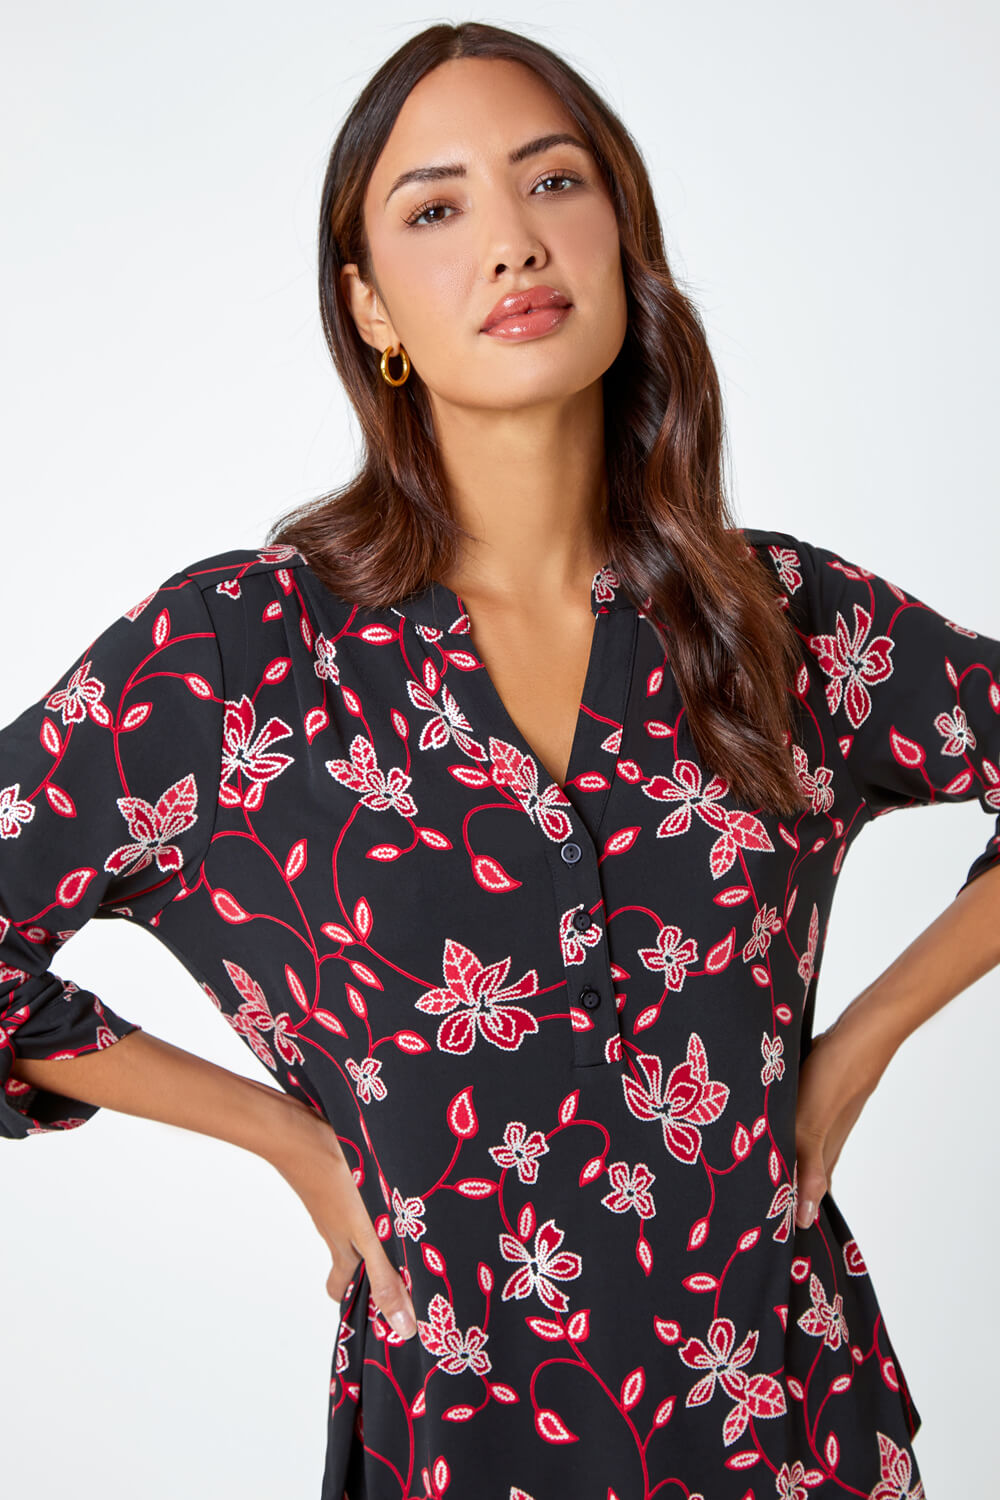 Red Textured Floral Stretch Jersey Shirt, Image 4 of 5